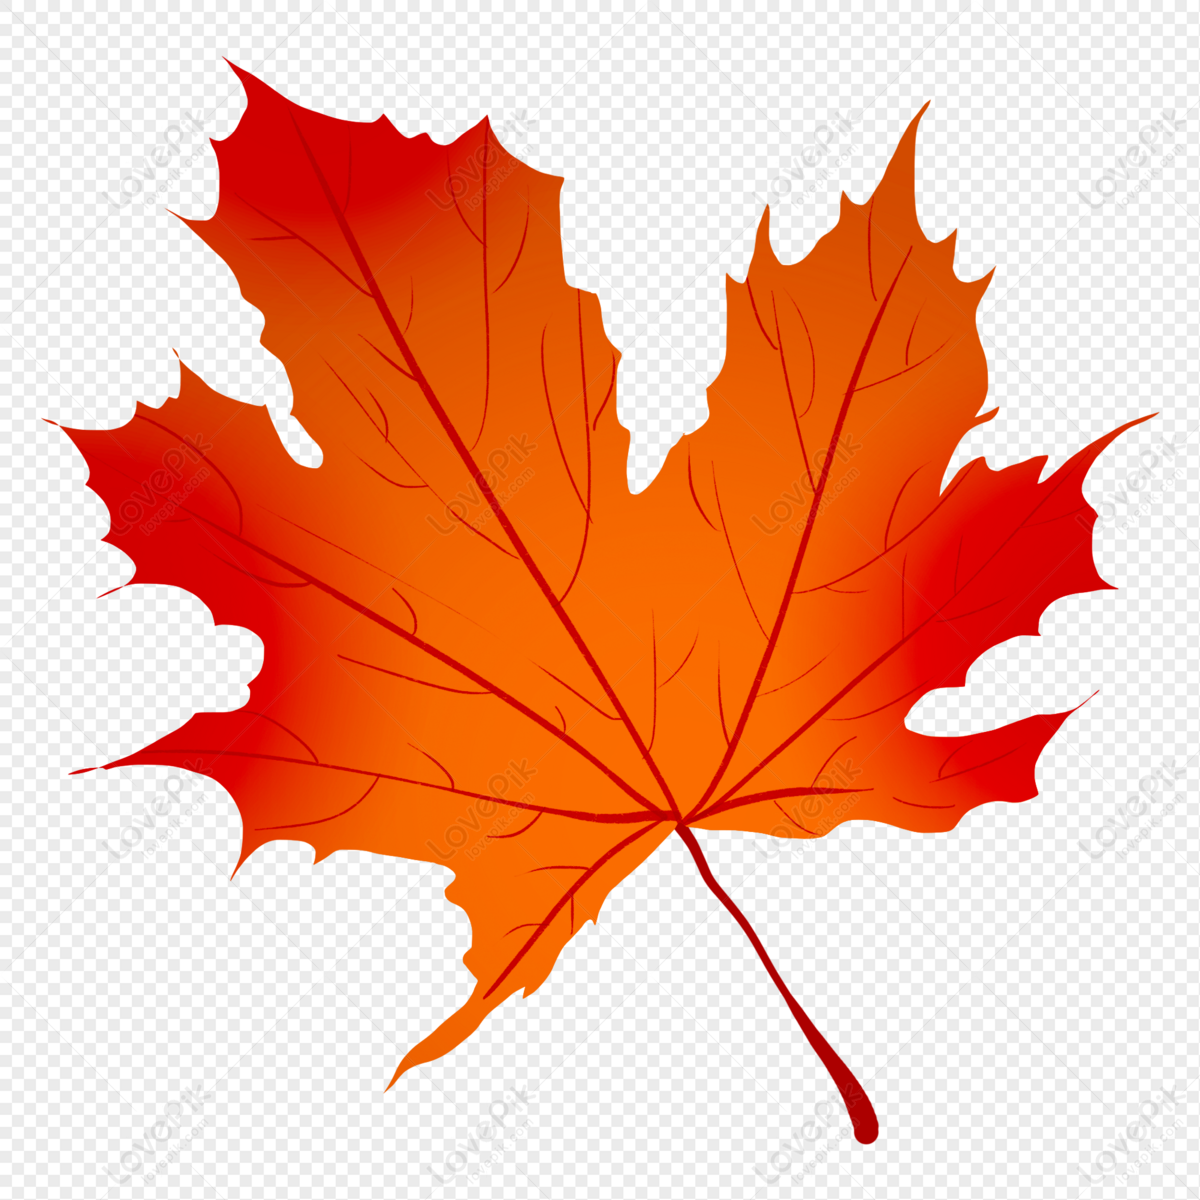 Red Maple Leaves PNG Image Free Download - Lovepik